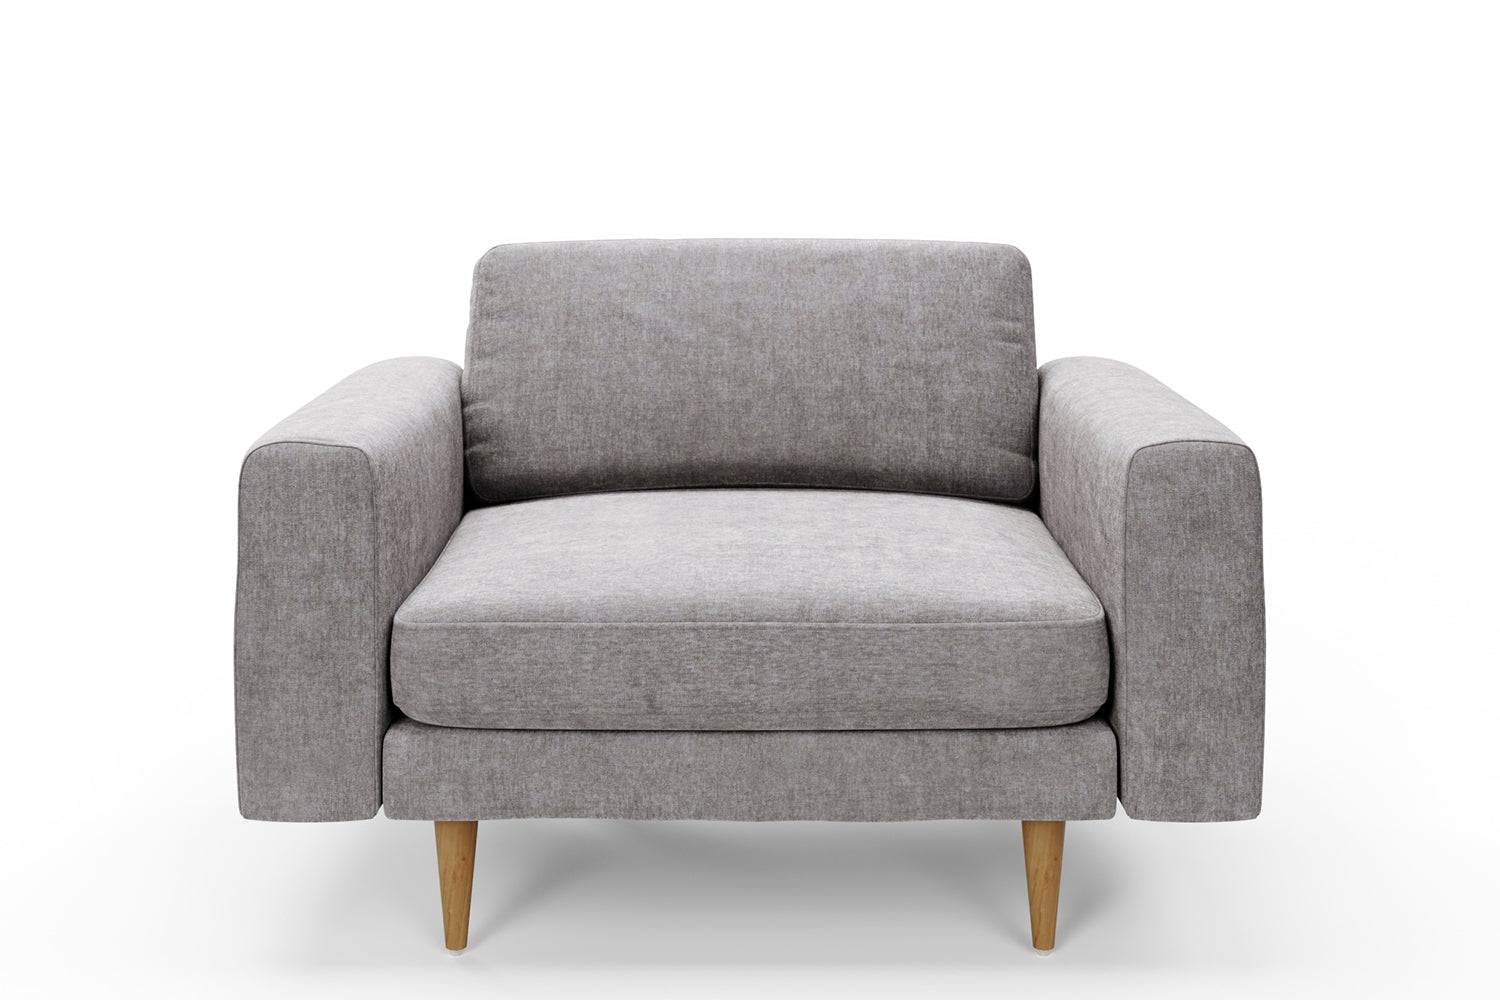 SNUG | The Big Chill 1.5 Seater Snuggler in Mid Grey variant_40414875746352